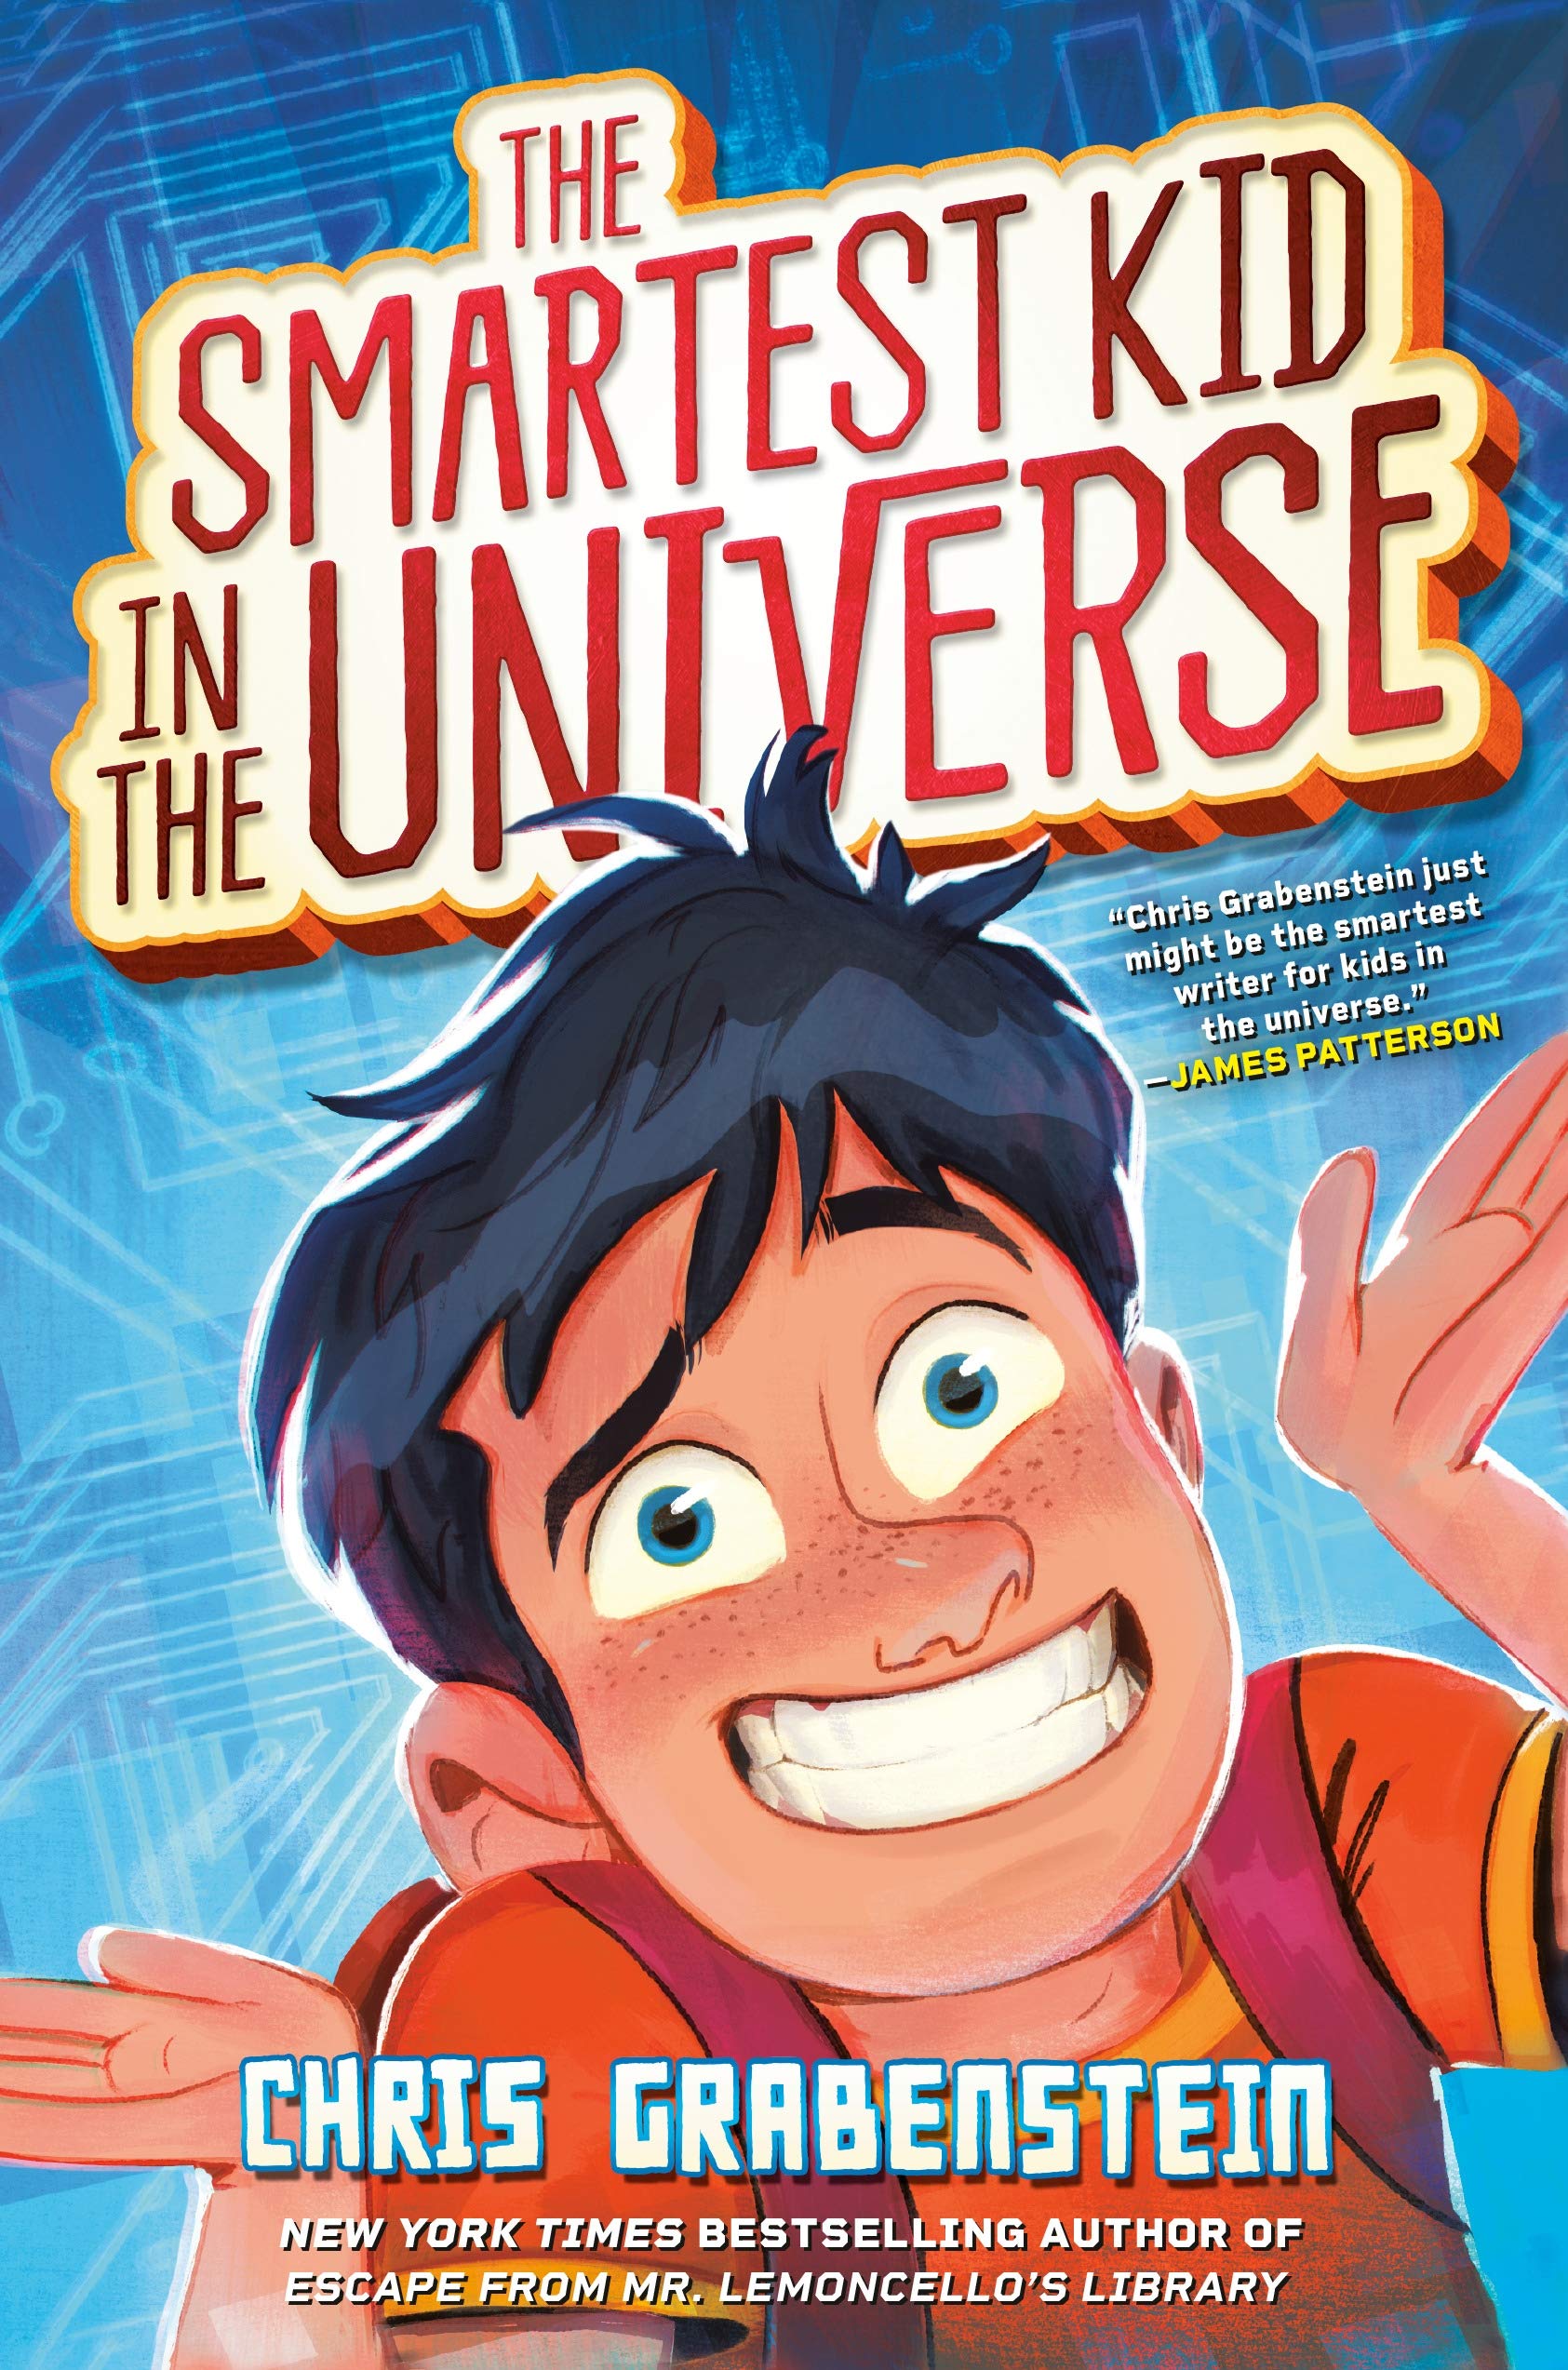 The Smartest Kid in the Universe (Smartest Kid in the Universe #1) by Chris Grabenstein